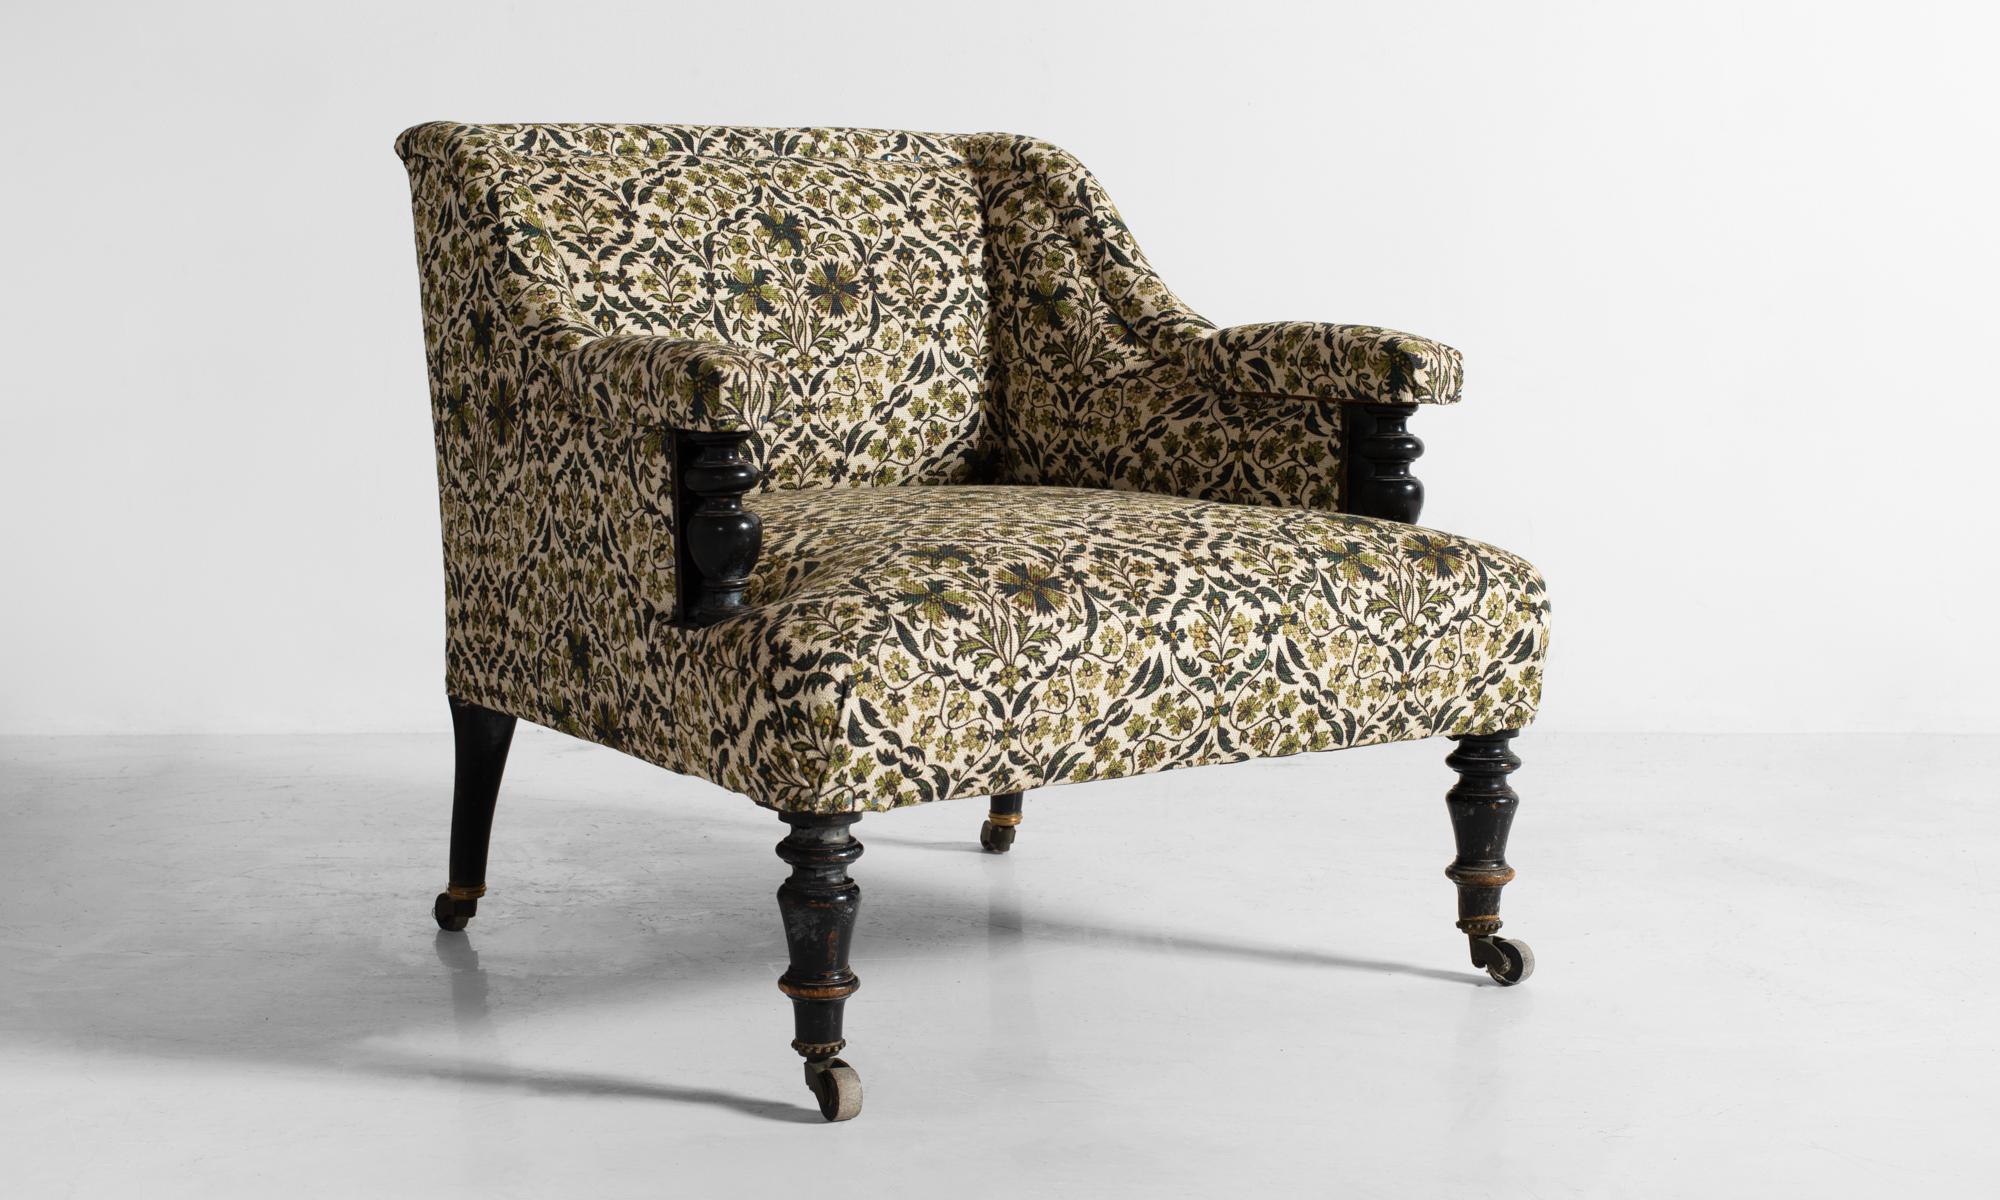 Petite chair, France, circa 1890.

Smaller-sized chair with hand-turned detailing and original casters. Newly reupholstered in Liberty of London fabric.